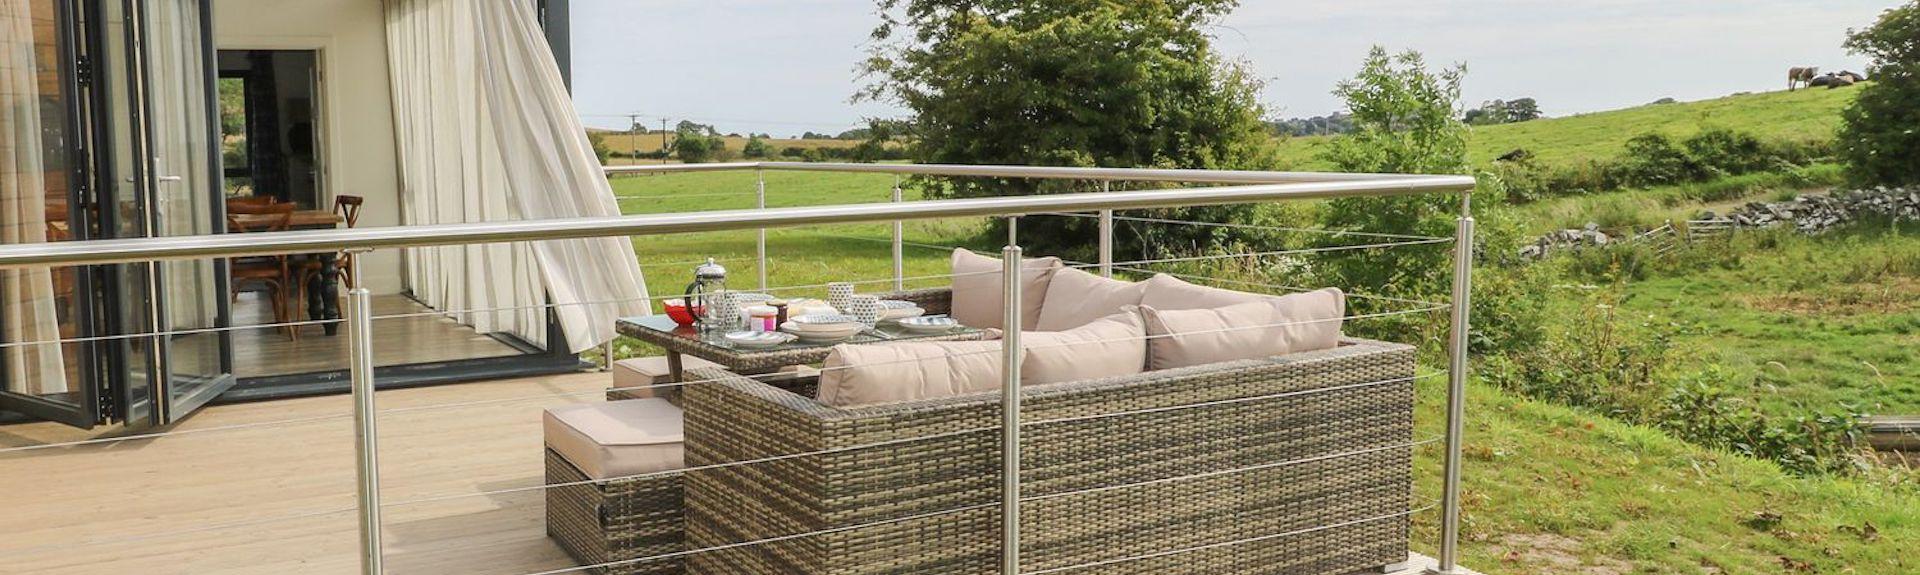 Relax in comfort in the Northumberland countryside.